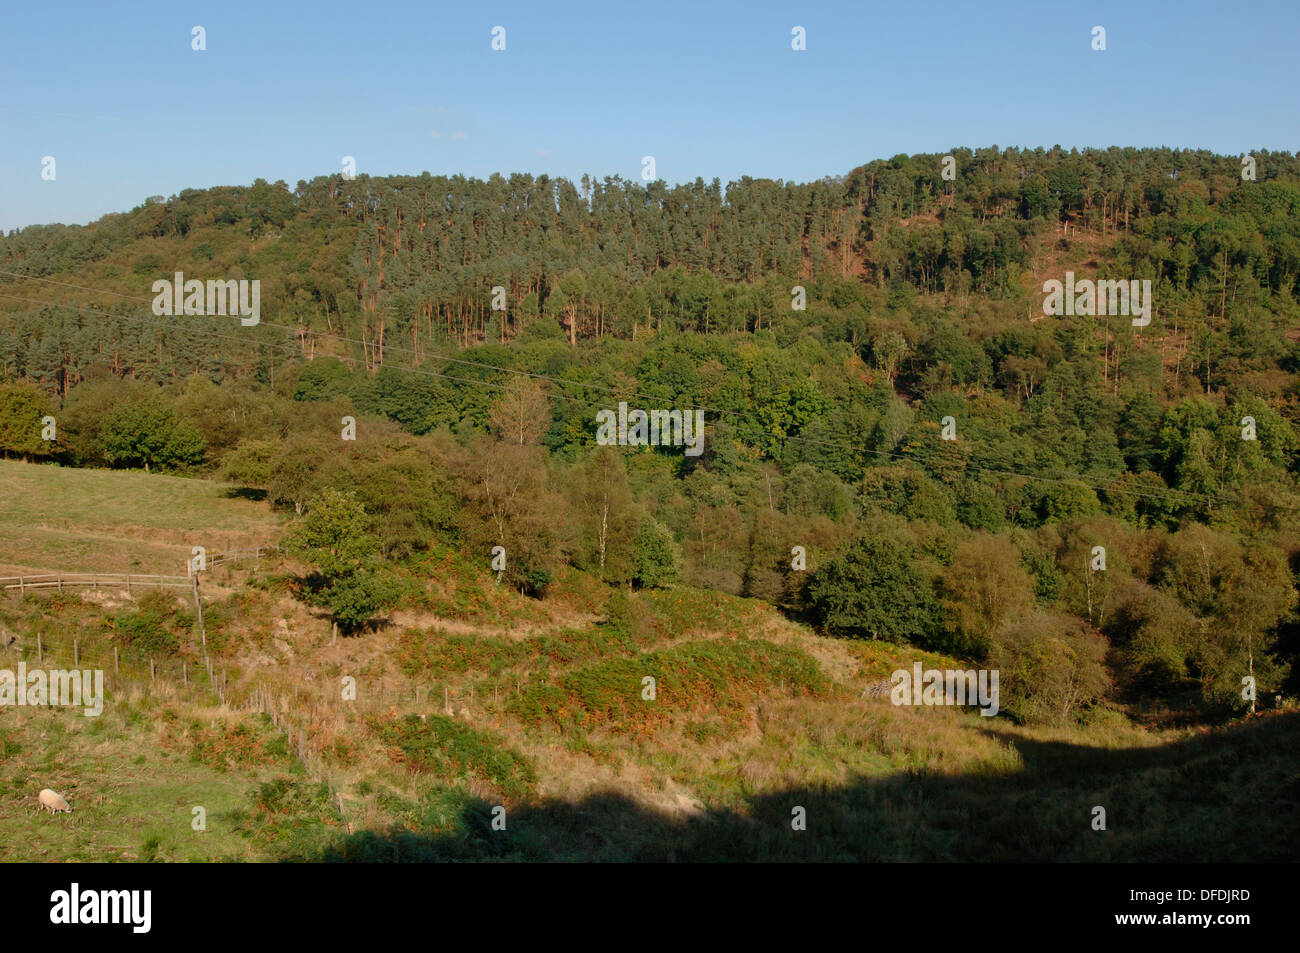 Part Of The Churnet Valley In Staffordshire England. Stock Photo